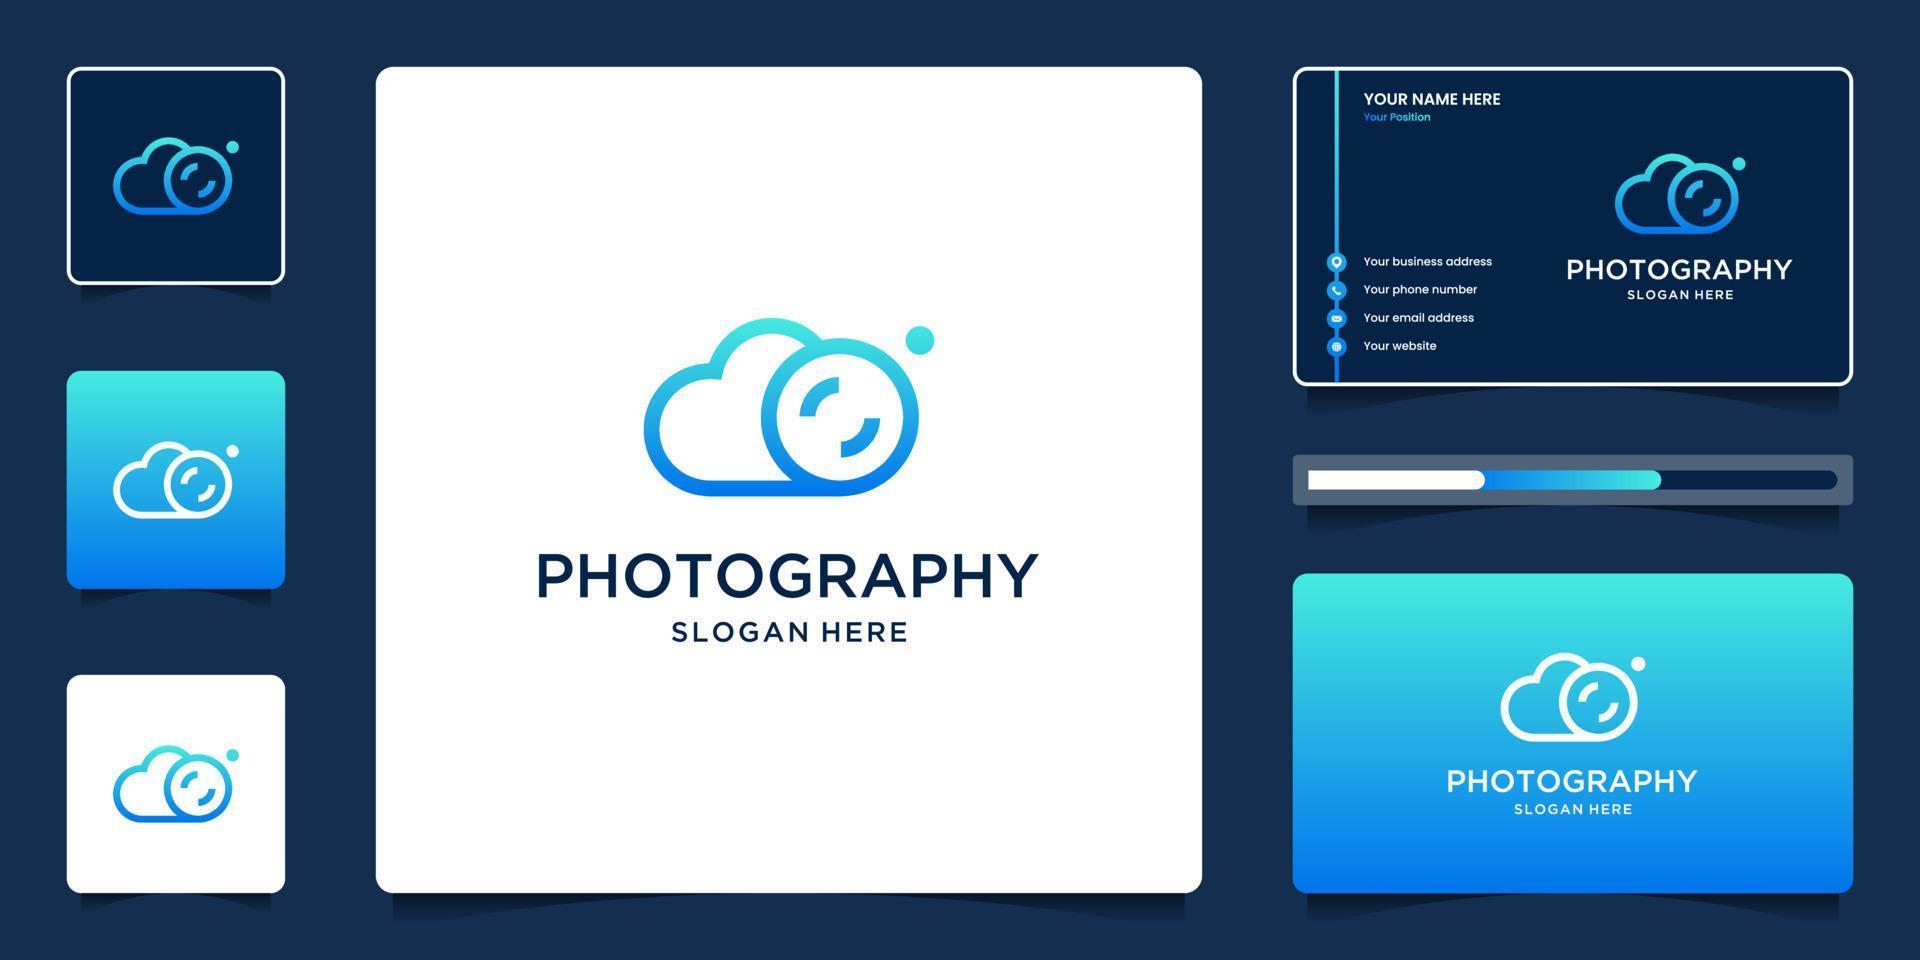 Creative combination of clouds and photo frames logo design for photography with business cards vector